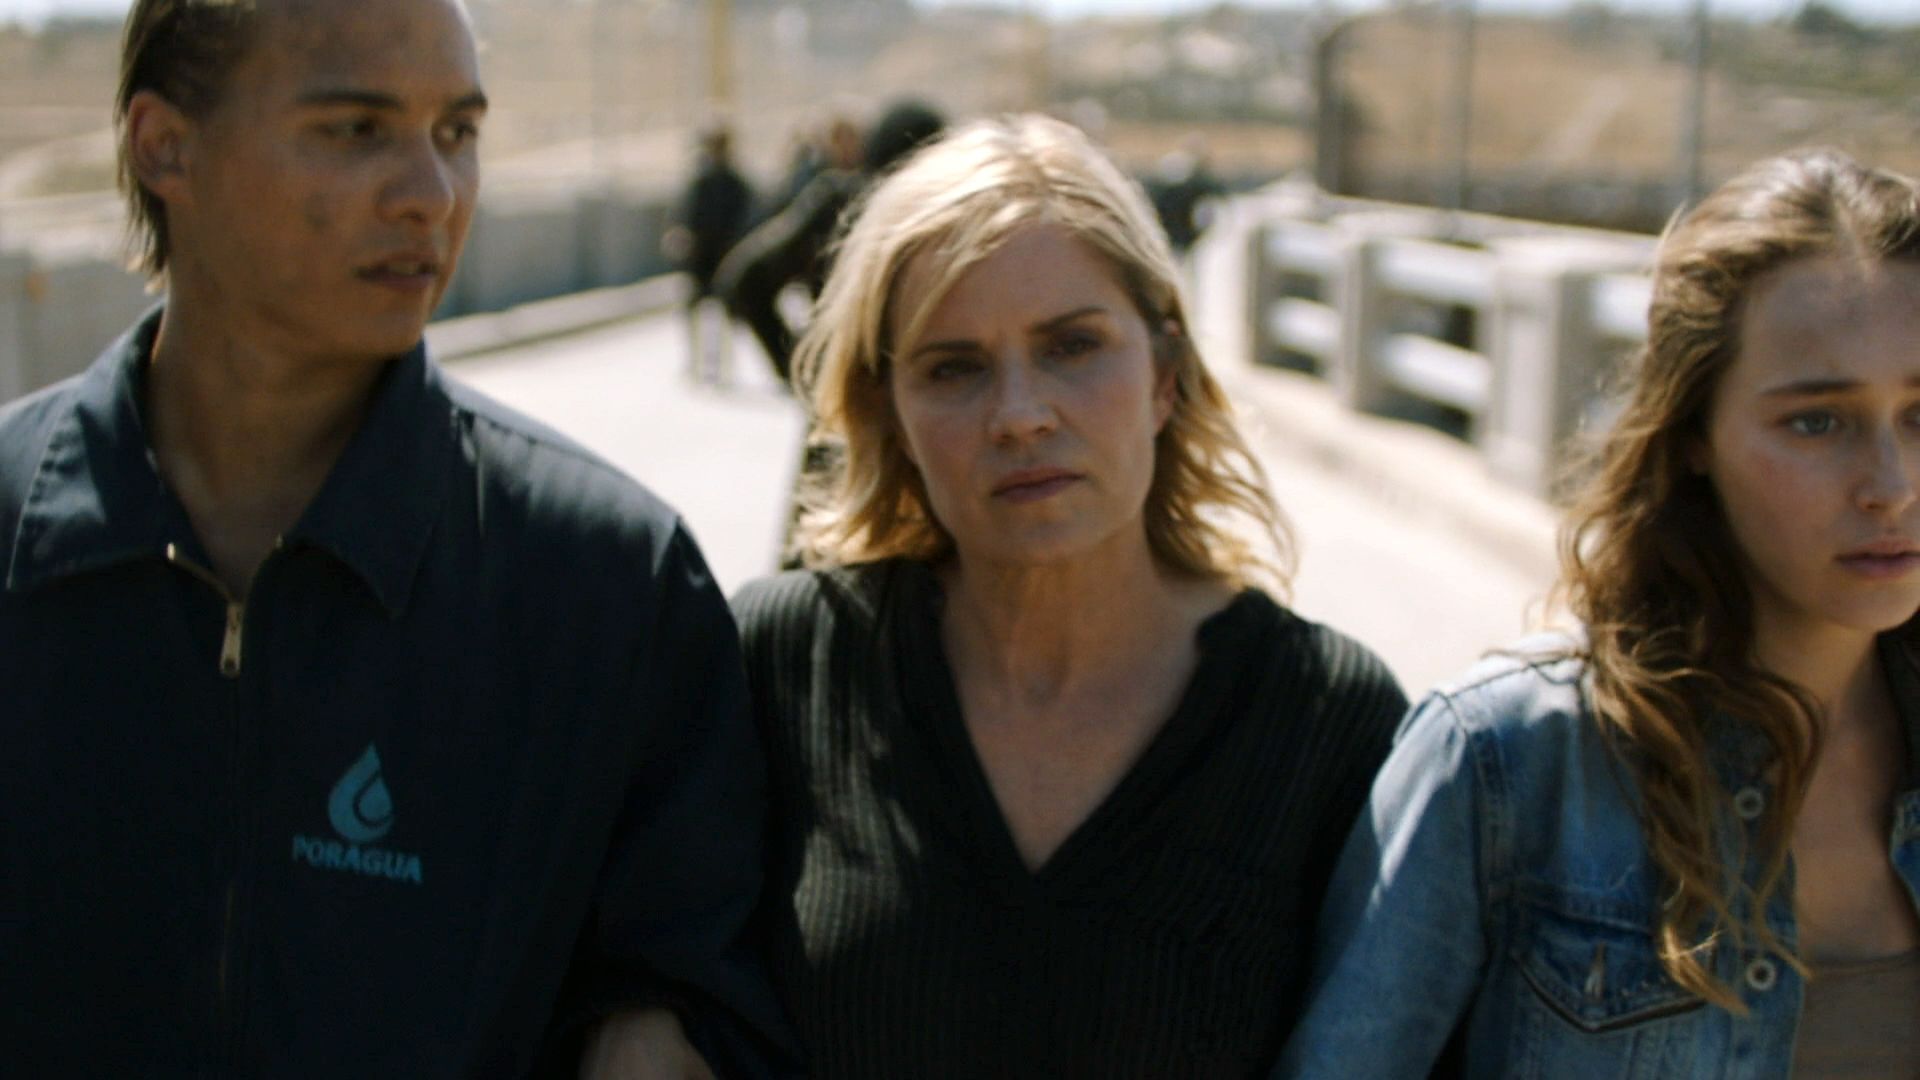 fear the walking dead s03e torrents free download search